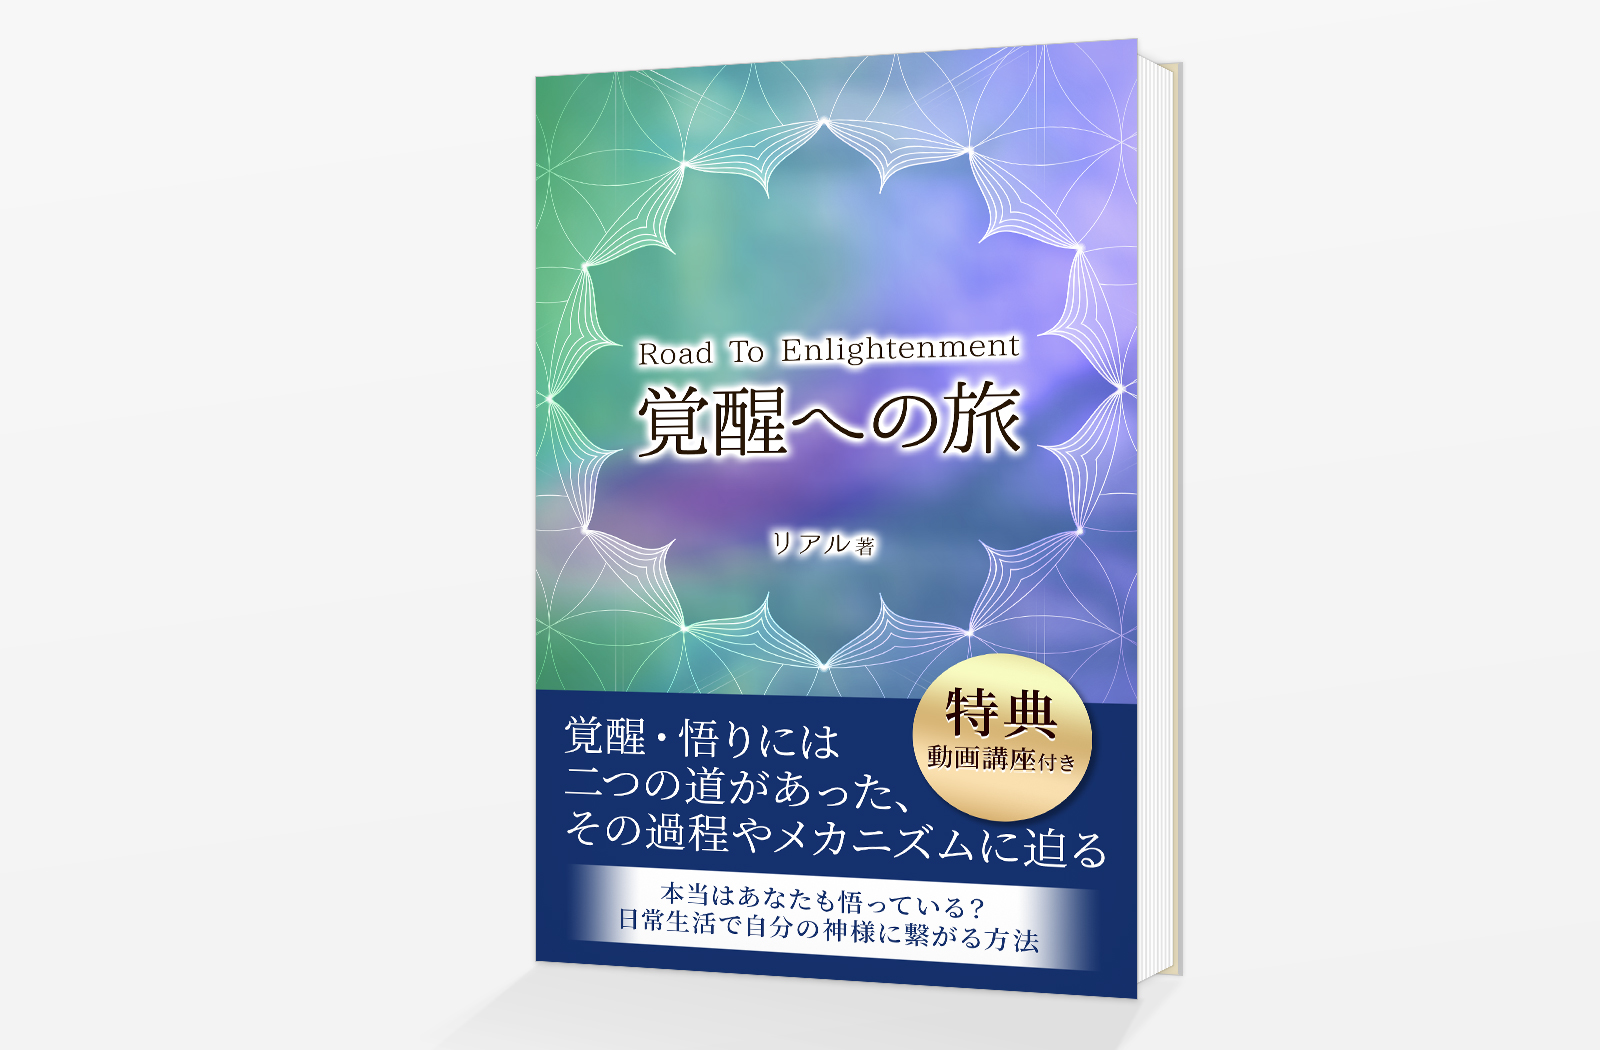 Kindle電子書籍「覚醒への旅: road to enlightenment」の表紙デザイン